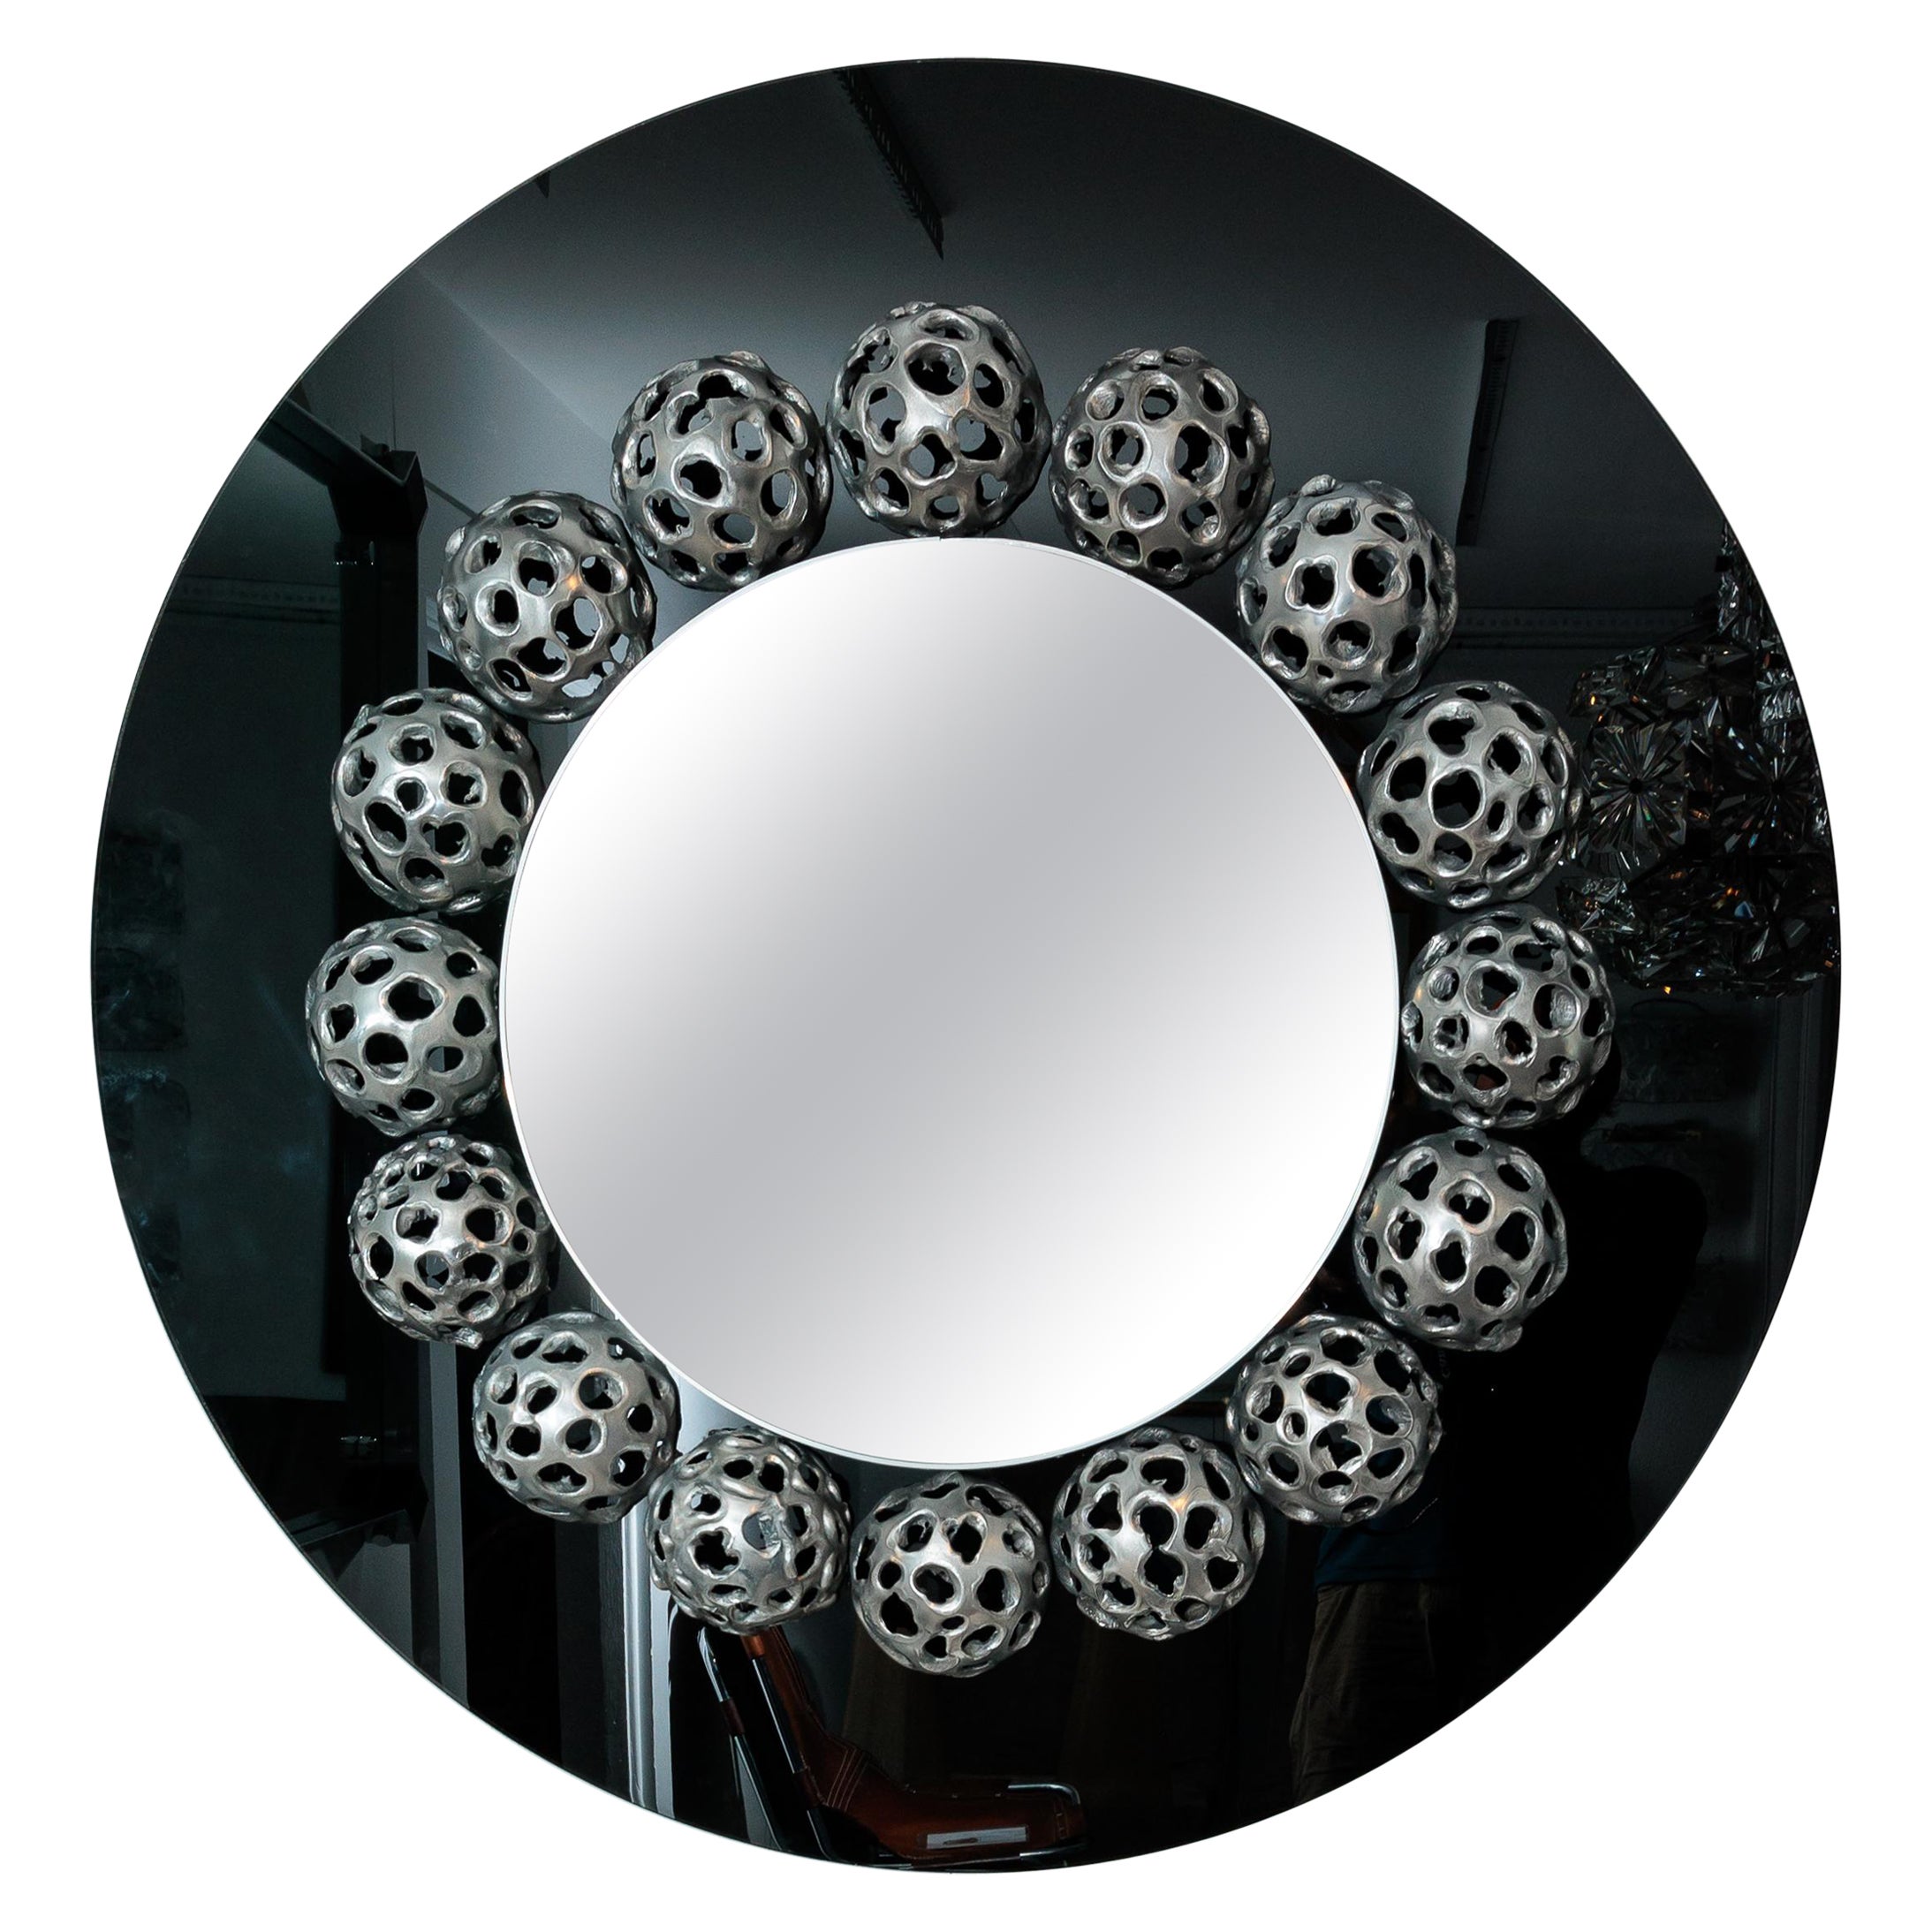 Round Mirror with 17 Metal Perforated Orbs on Black Glass